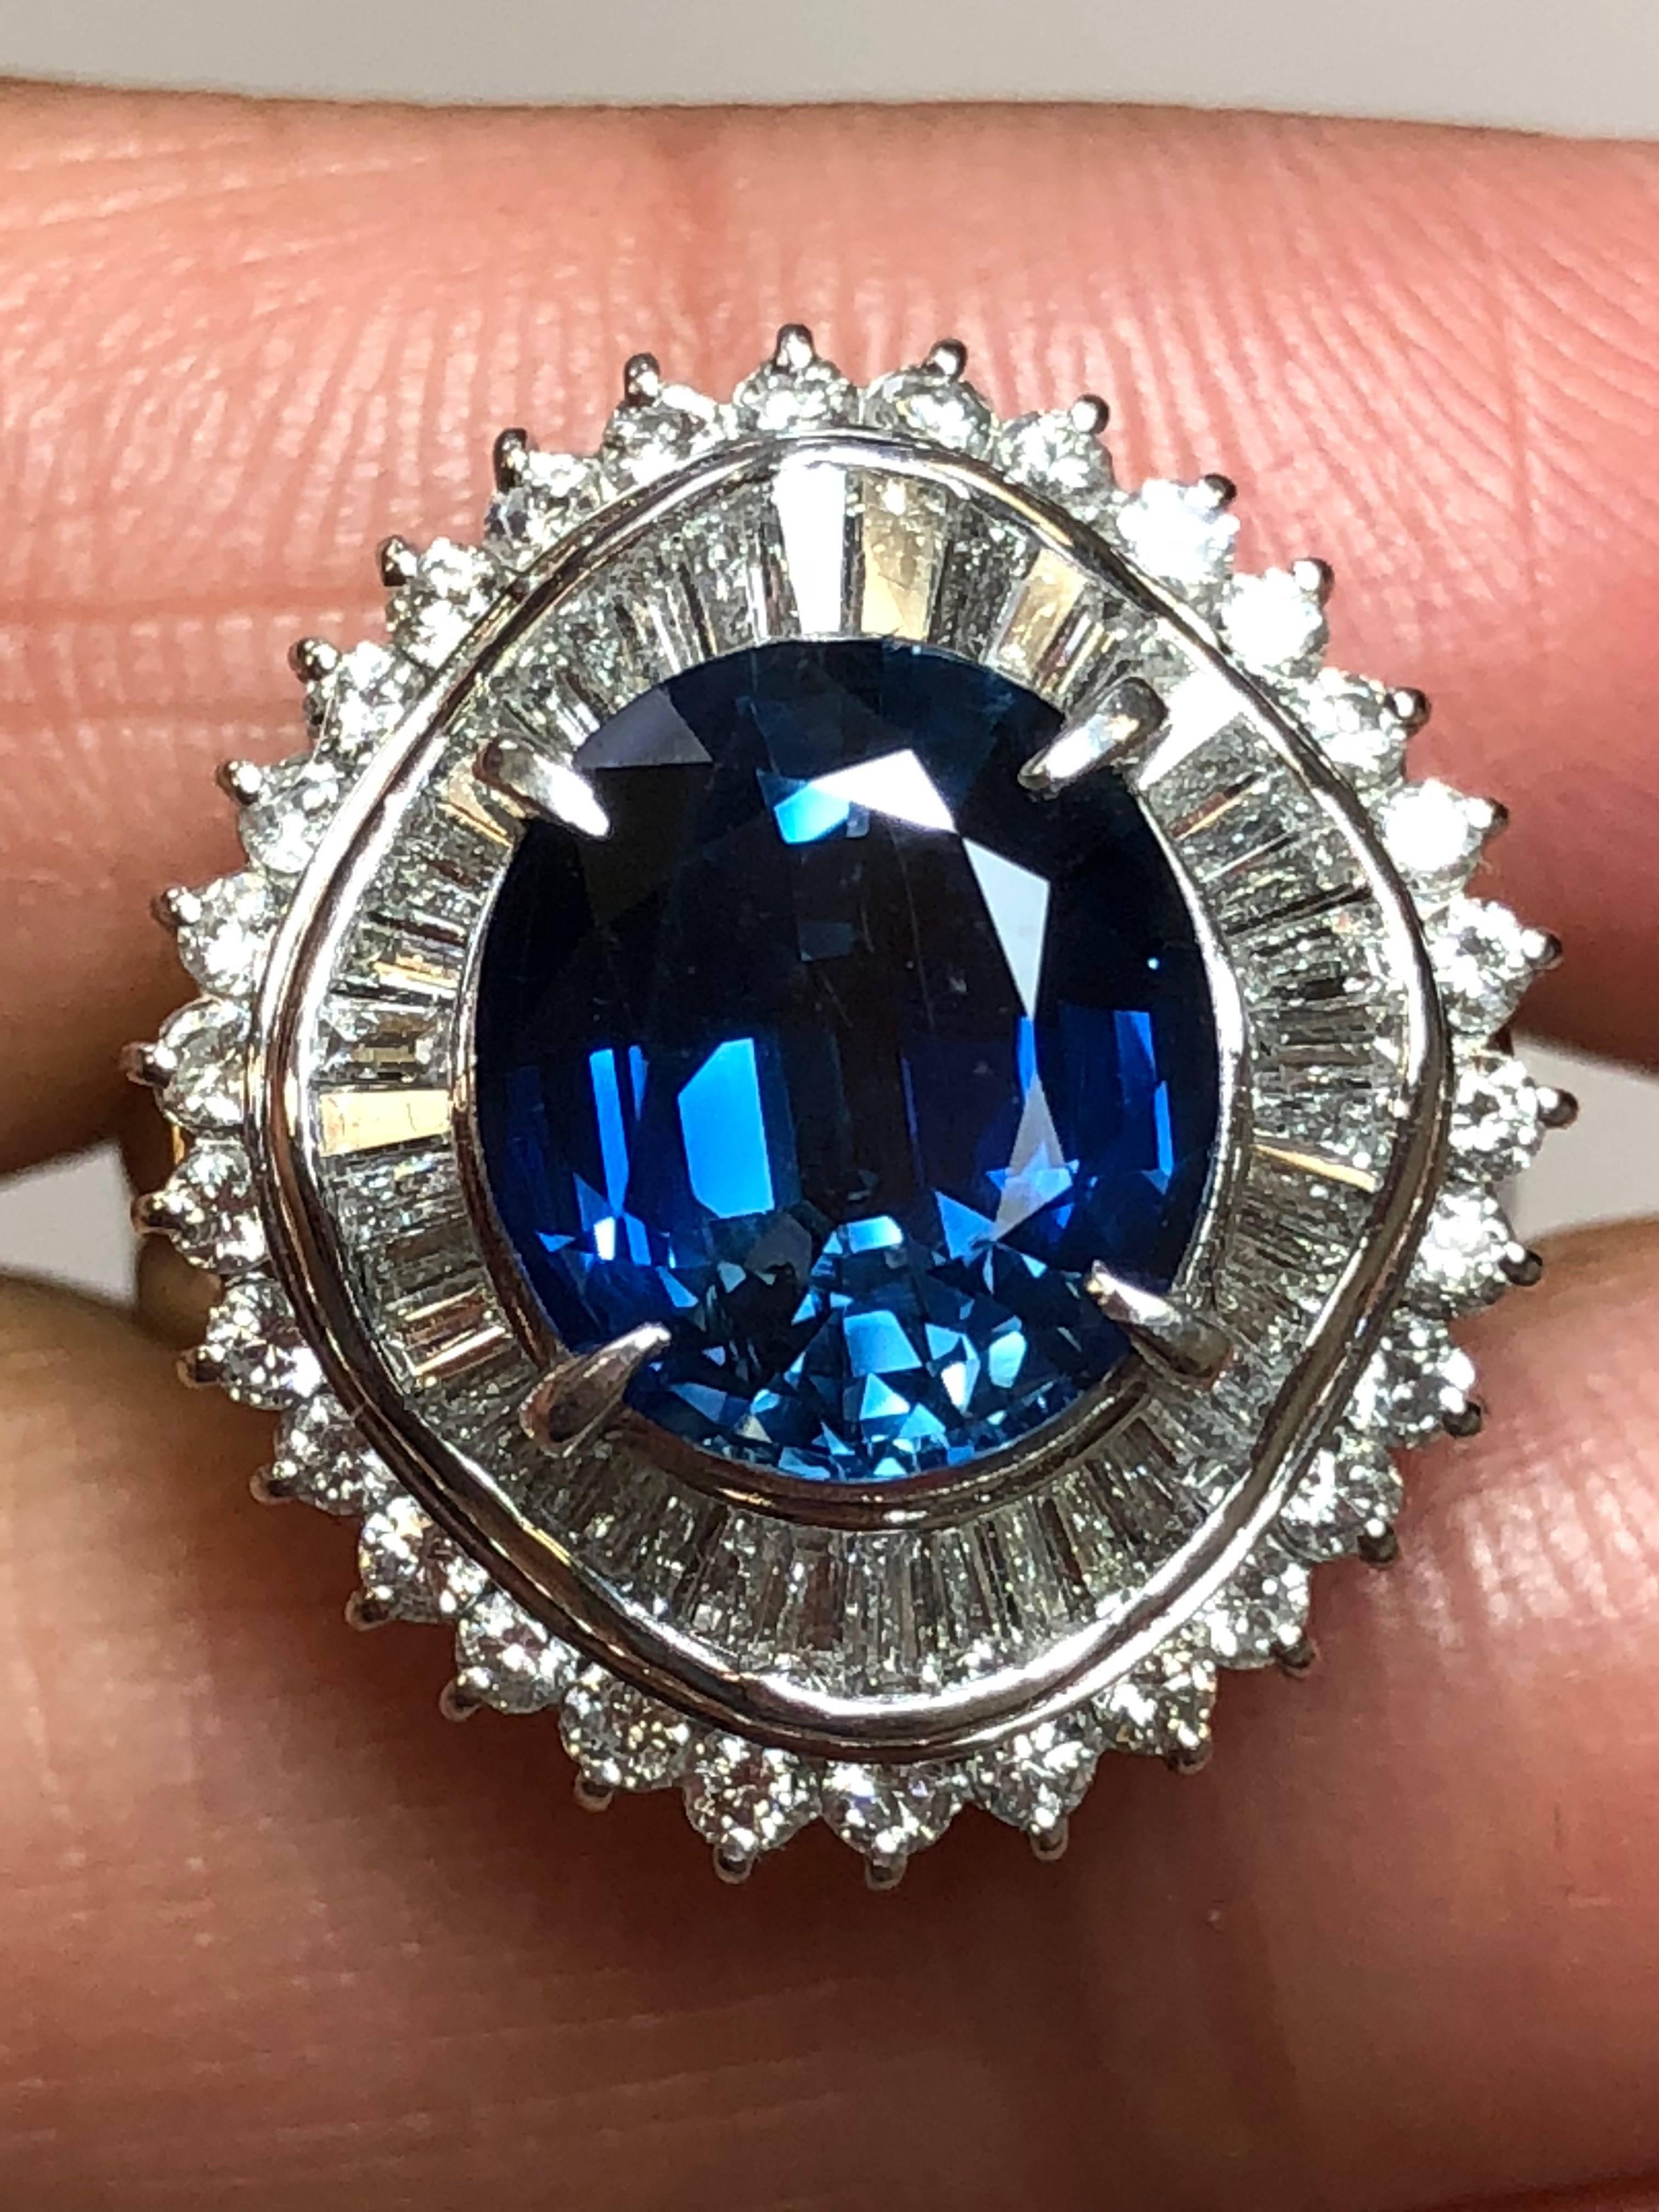 Lovely 4.01 carat blue sapphire oval surrounded by 1.45 carats of brilliant white diamonds in this beautiful platinum mounting. The classic design using baguettes and rounds makes this piece timeless. Size 7.75 and a perfect addition to any